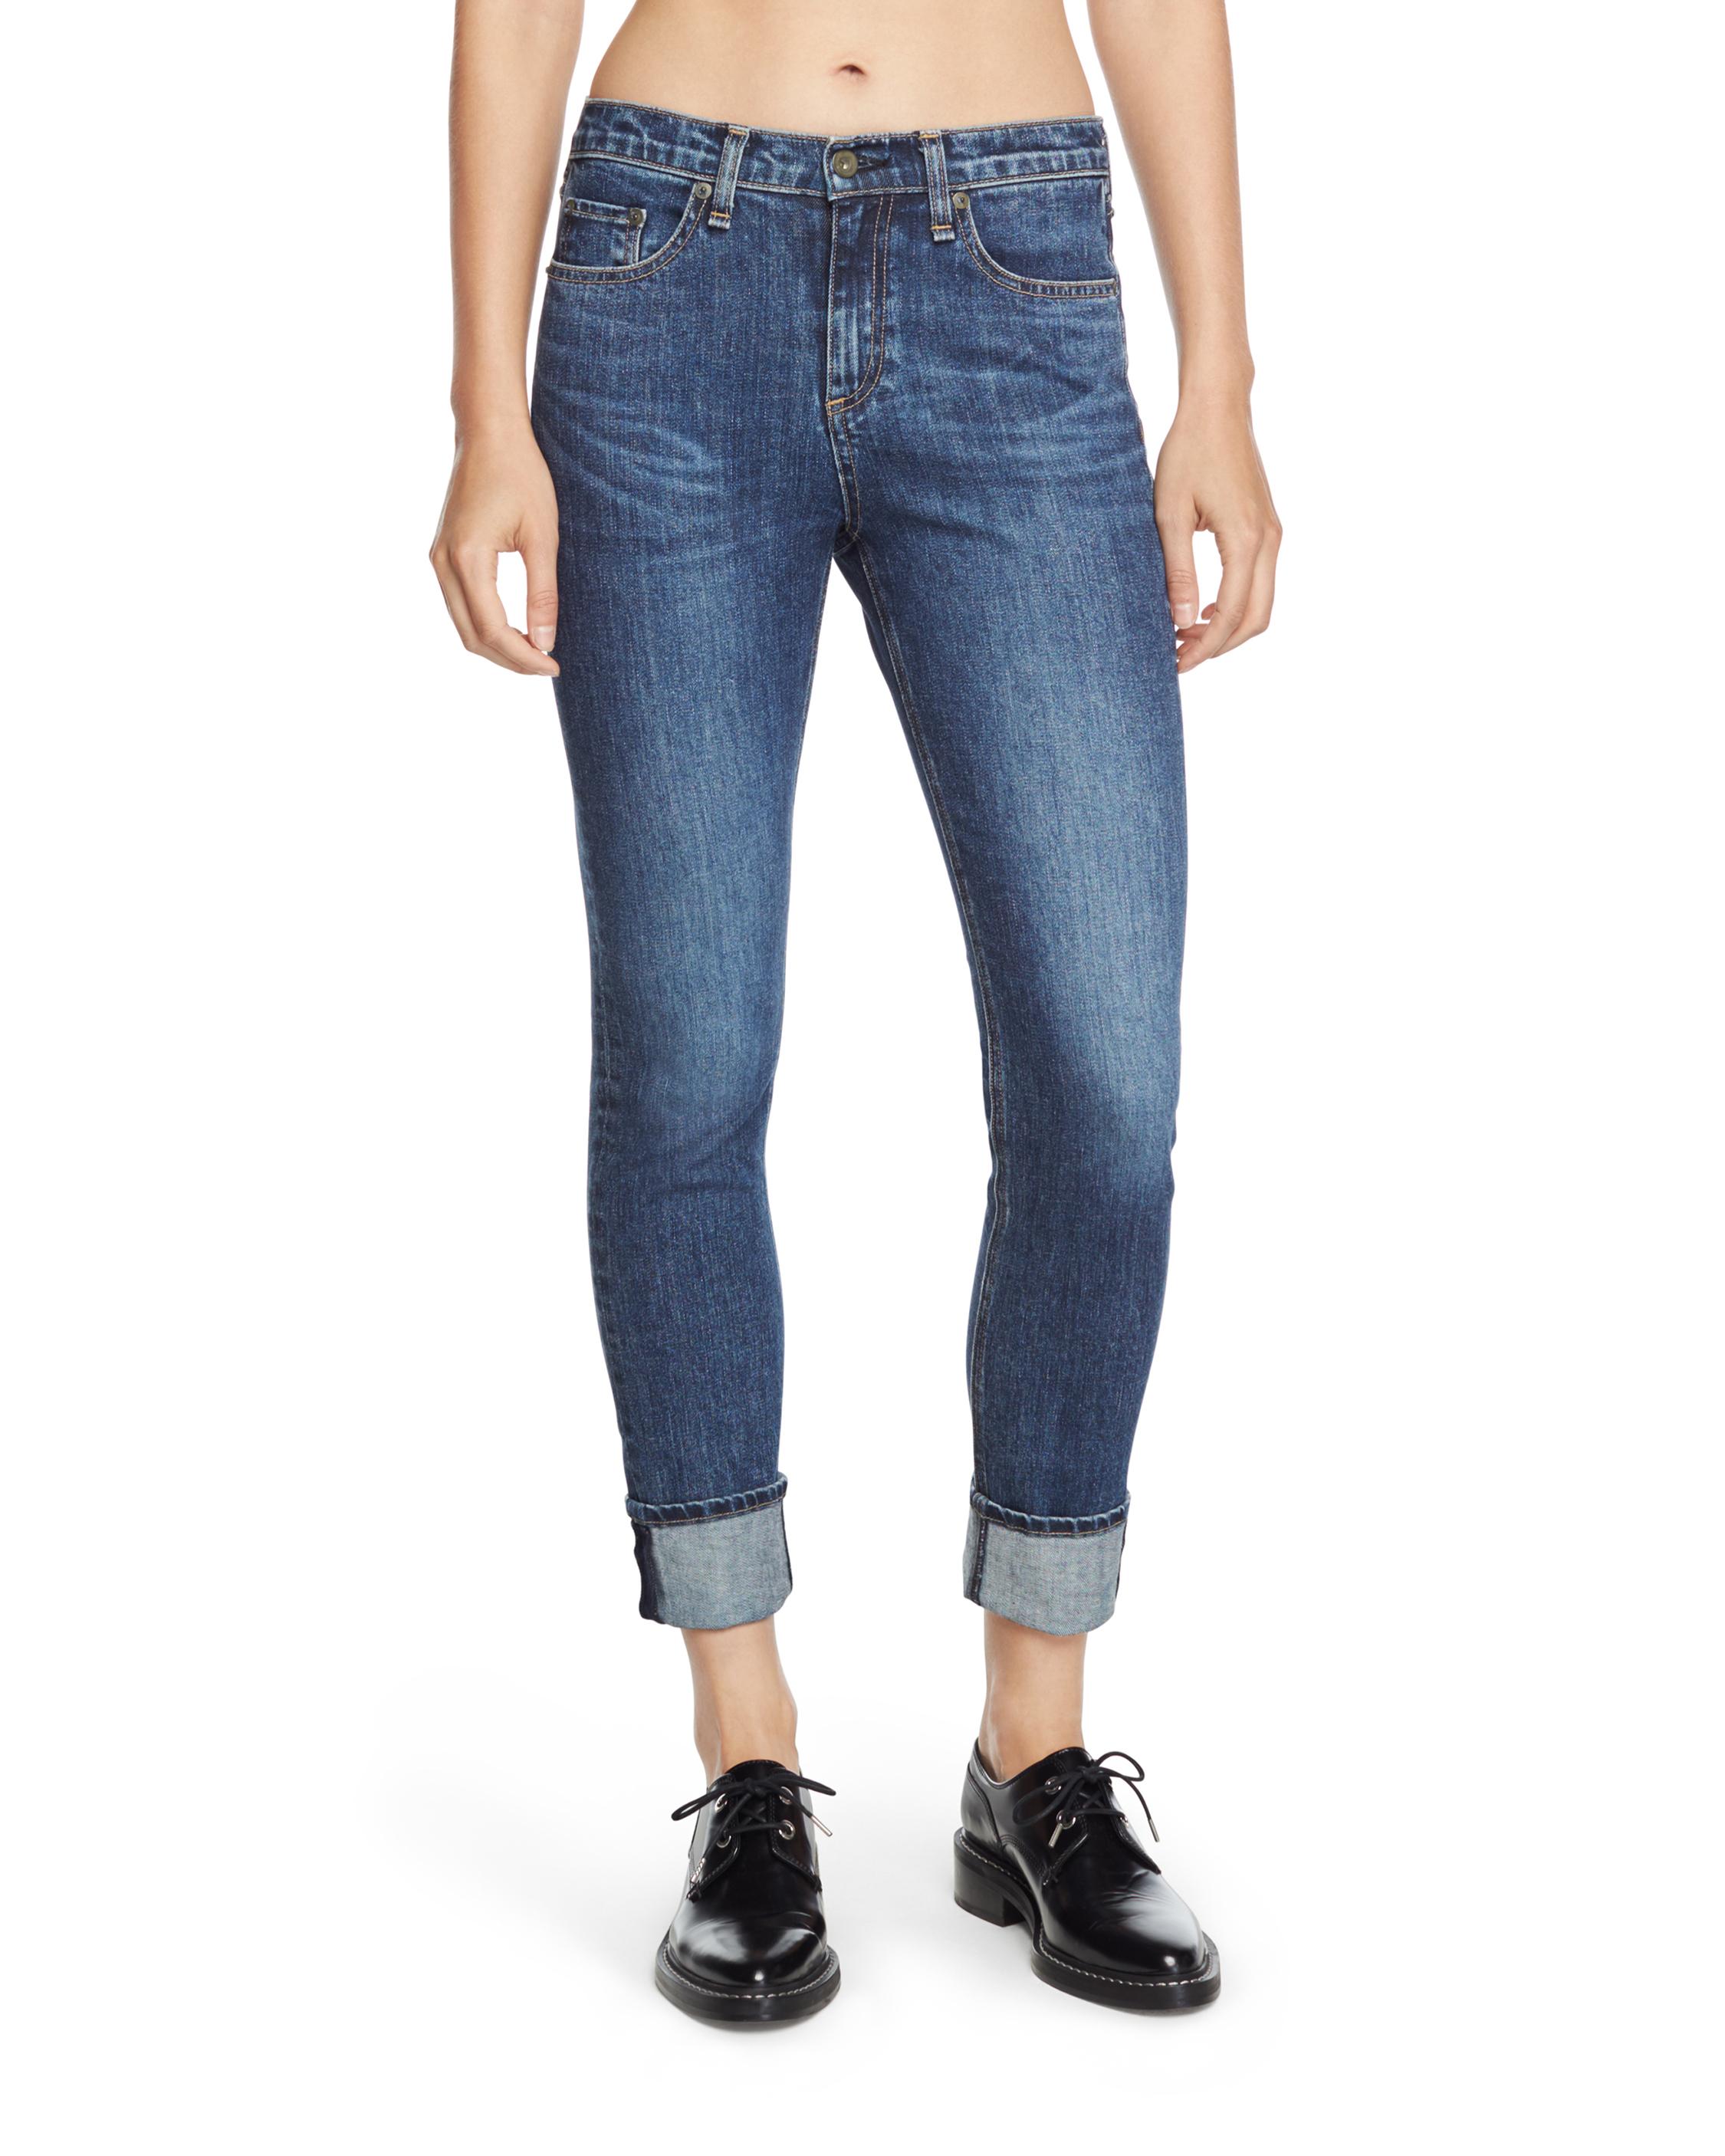 Jeans: Ankle Cut to Skinny, High Rise to Boyfriend & Crop with Urban